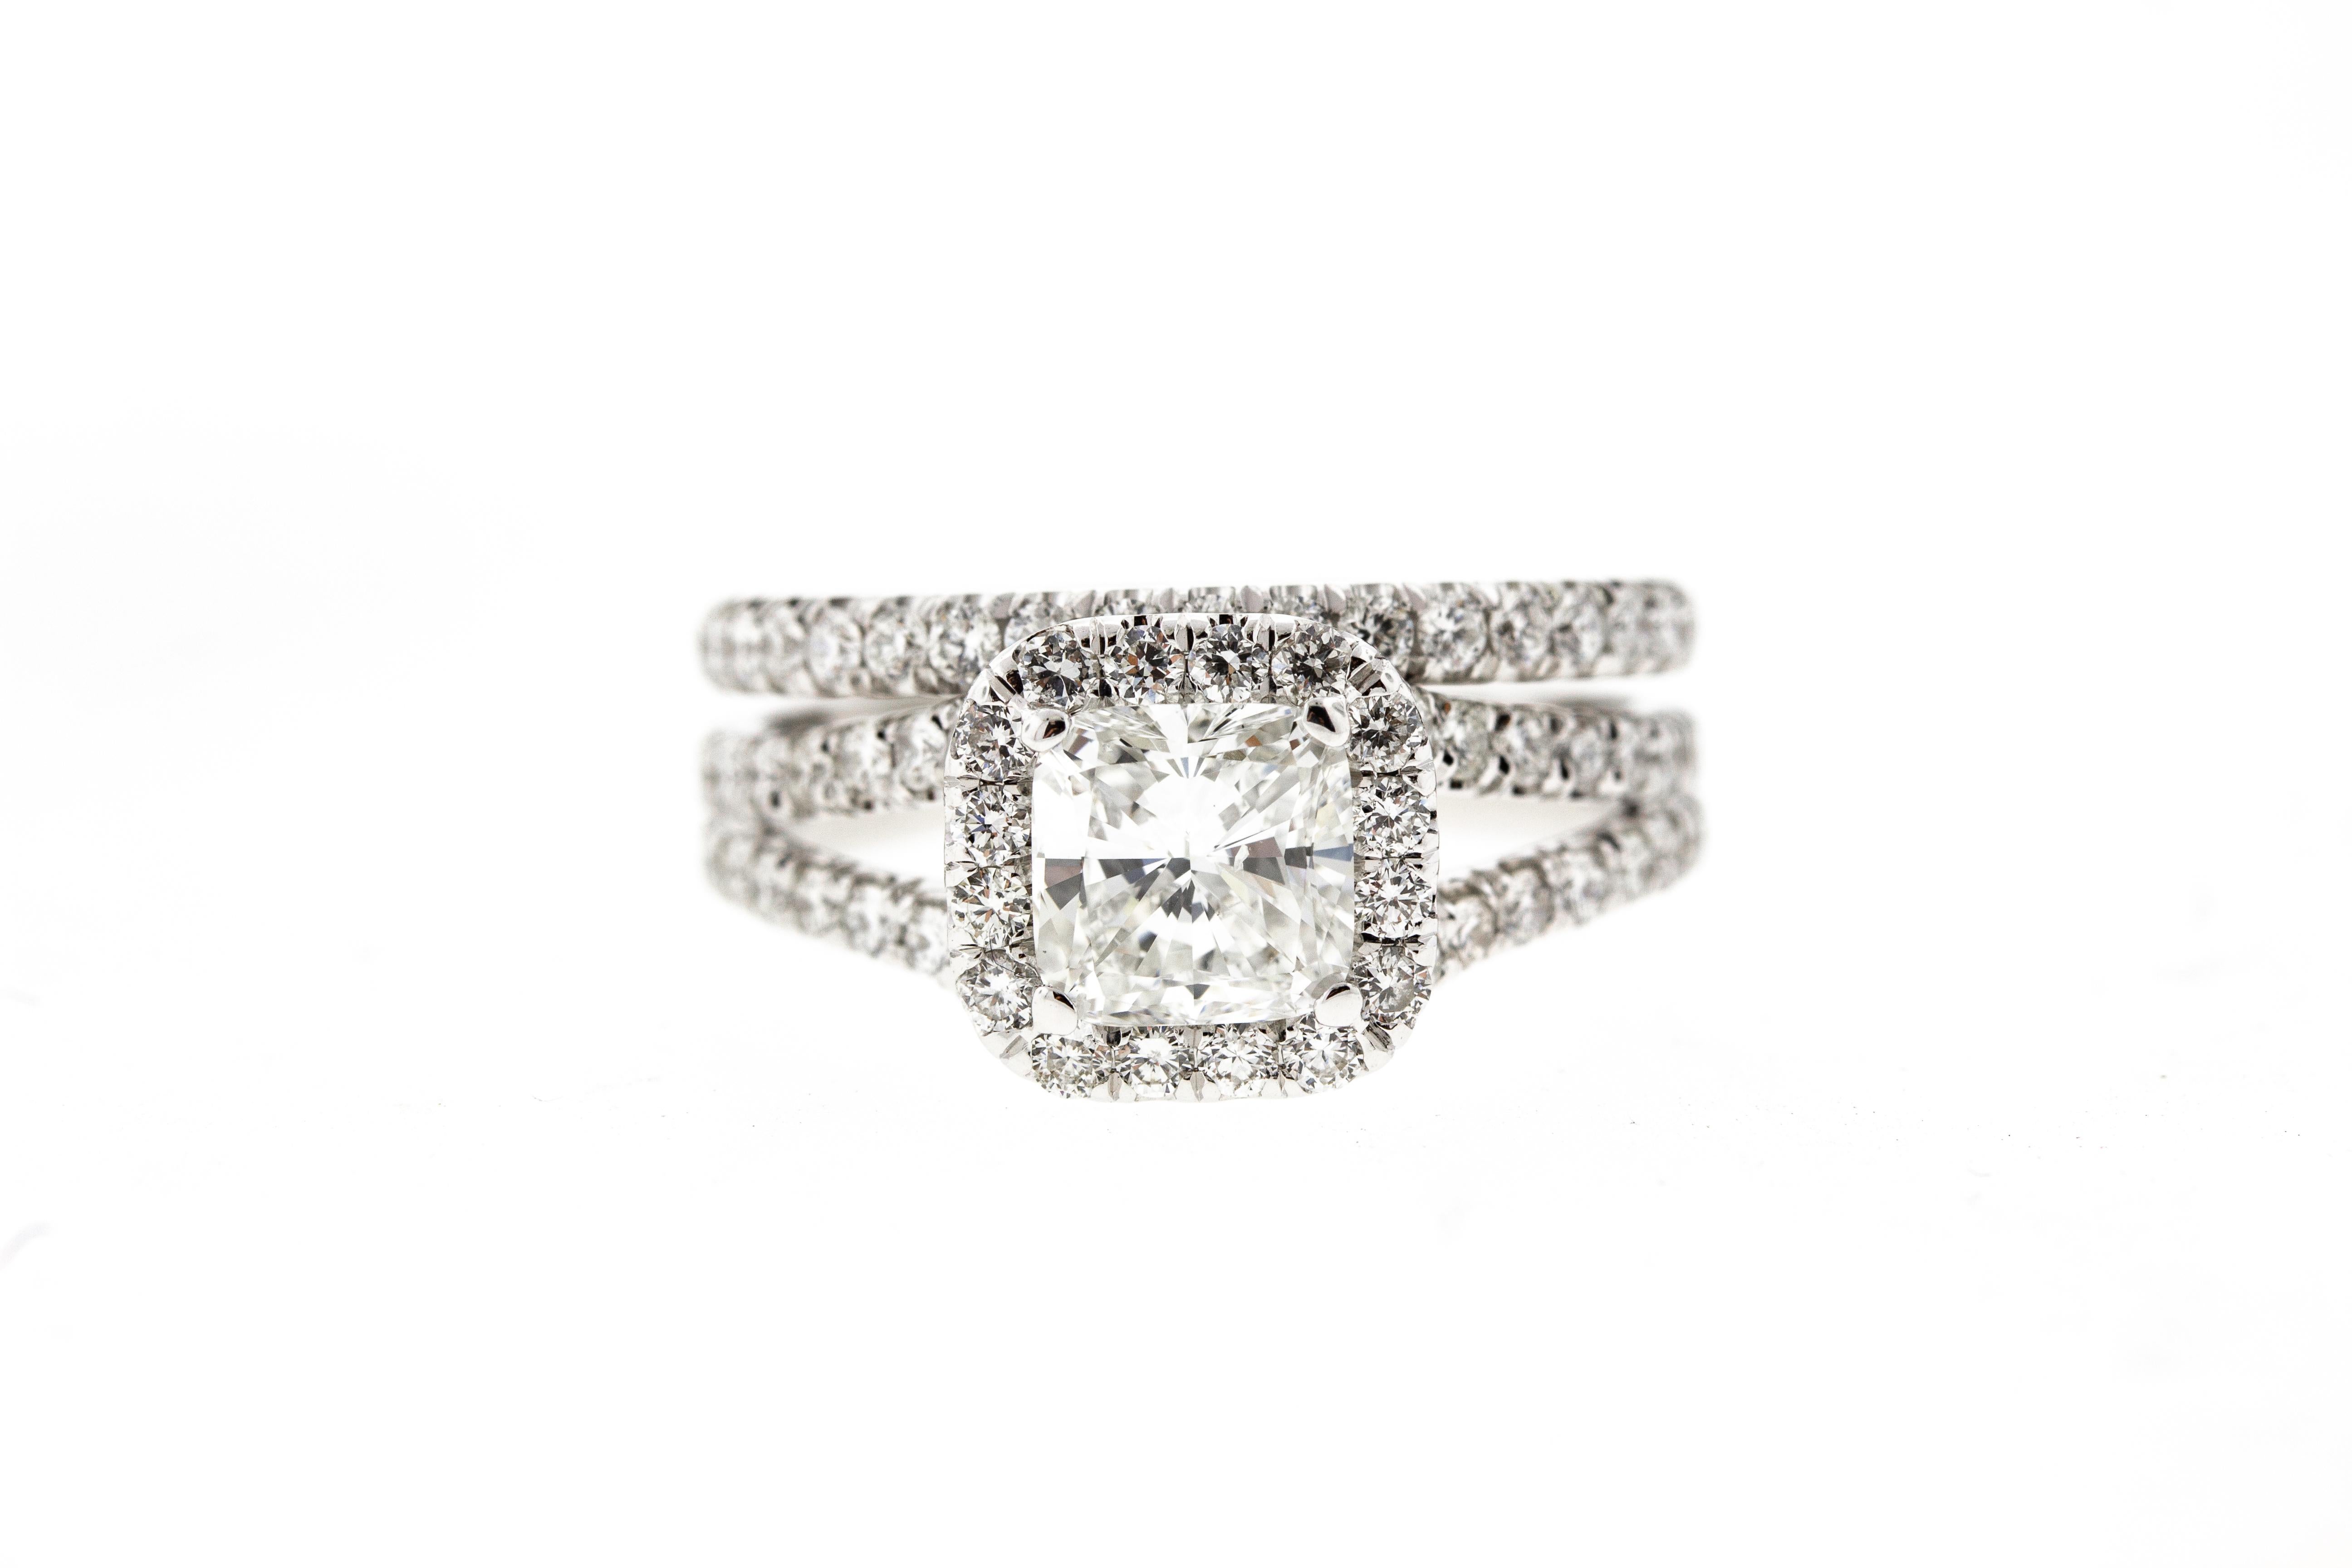 This Split Shank Cushion Diamond Engagement Ring with Diamond Pave is crafted in 18KT white gold, and contains a Cushion Cut Diamond (1.00 carat, D color, SI1 clarity) surrounded by 65 Baguette Cut Diamonds (0.75 total carat weight, F color, VS